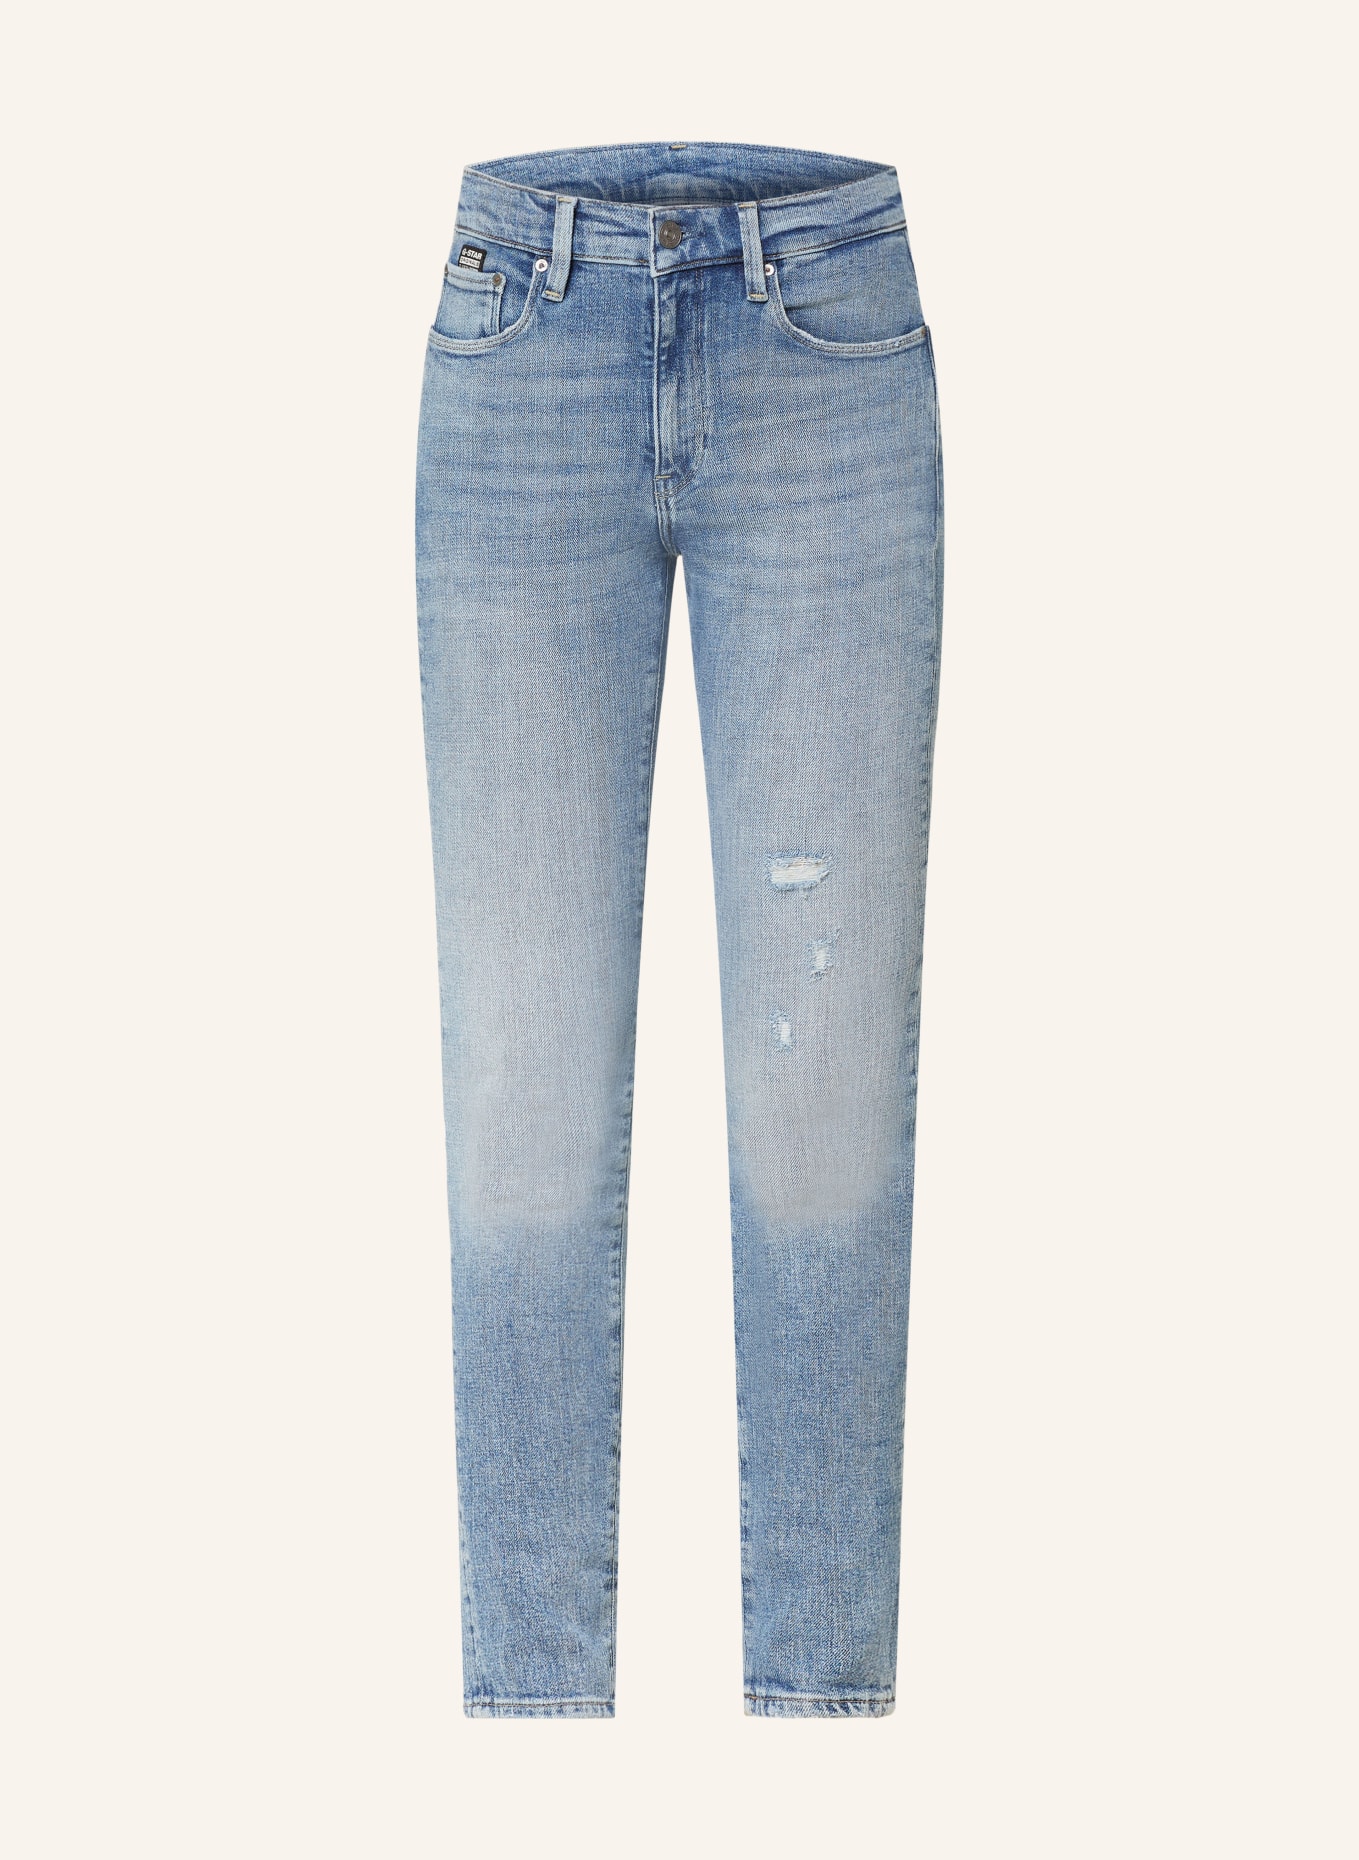 G-Star RAW Skinny jeans 3301, Color: G347 Sun faded Blue Donau (Image 1)